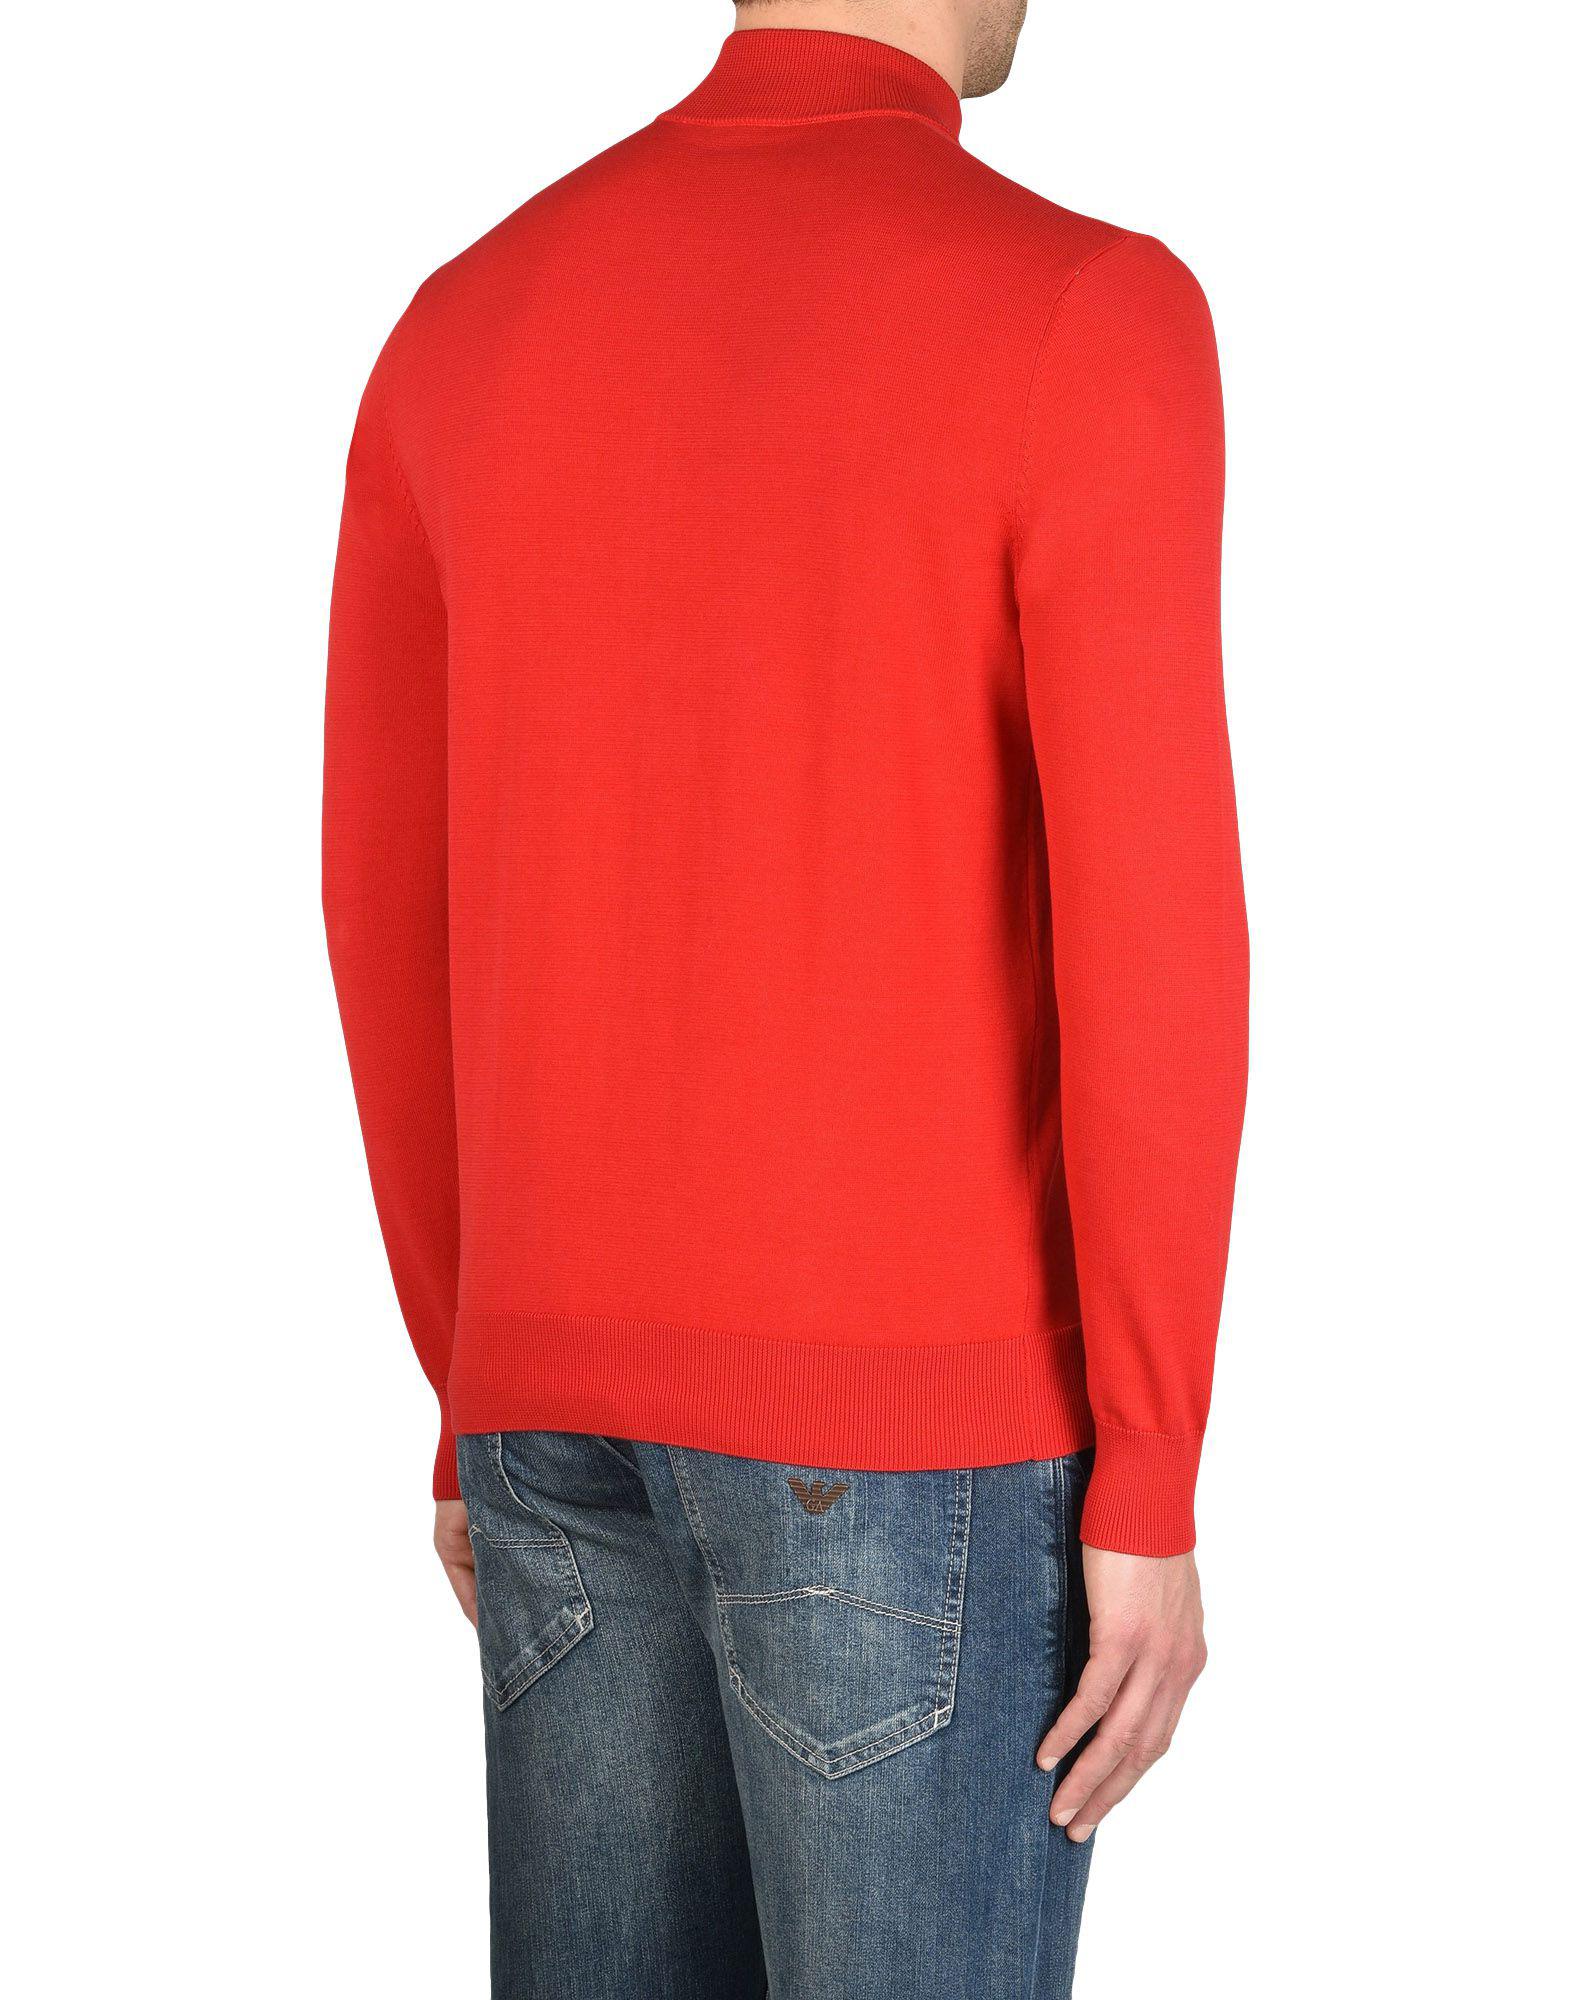 Armani Jeans Cotton Cardigan  in Red  for Men  Lyst